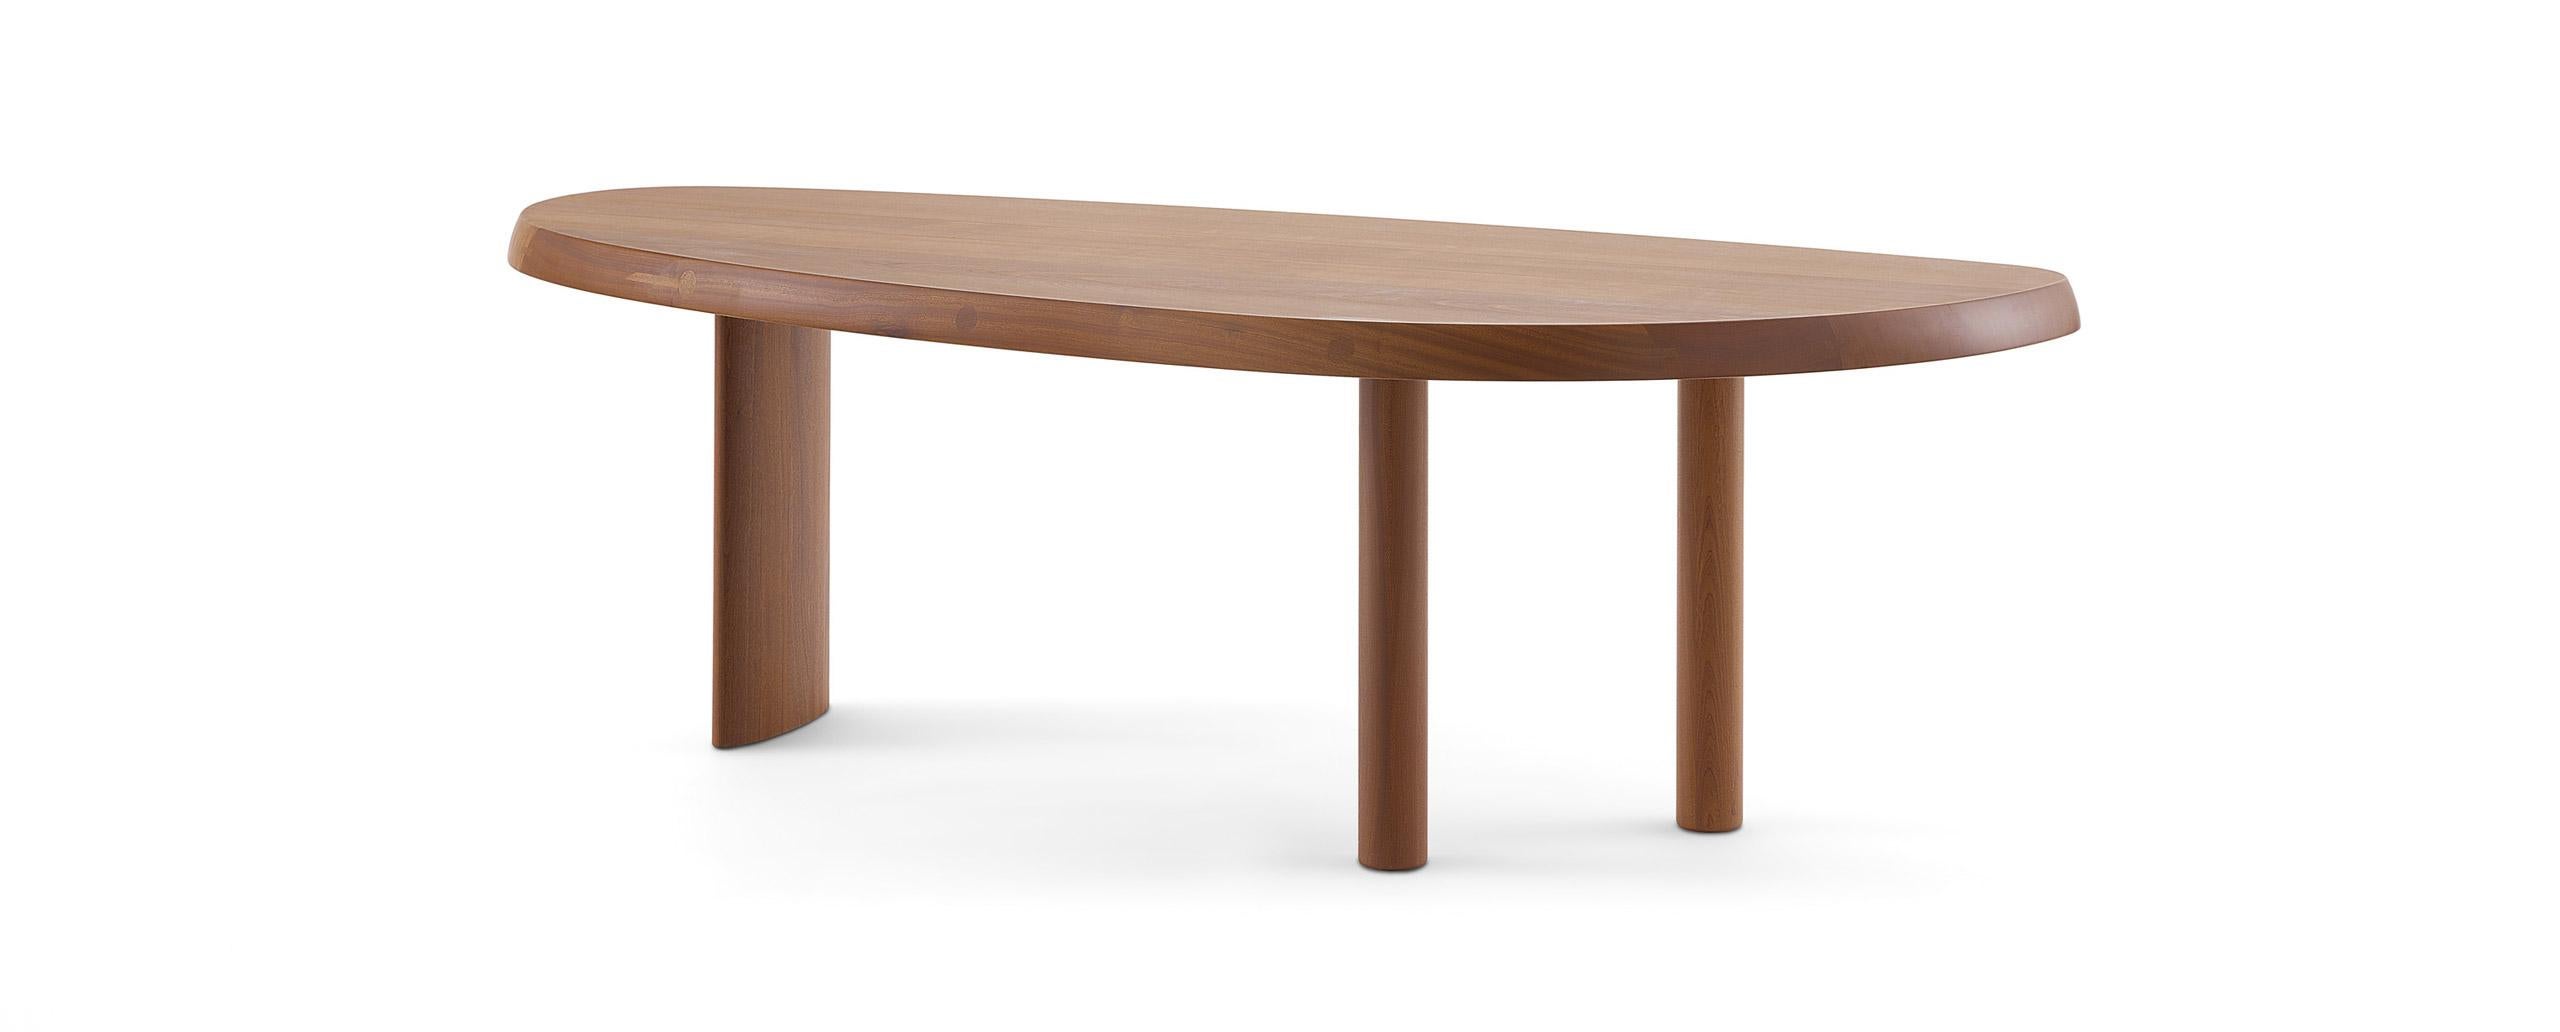 Charlotte Perriand Table En Forme Libre, Lacquered Wood by Cassina For Sale 2